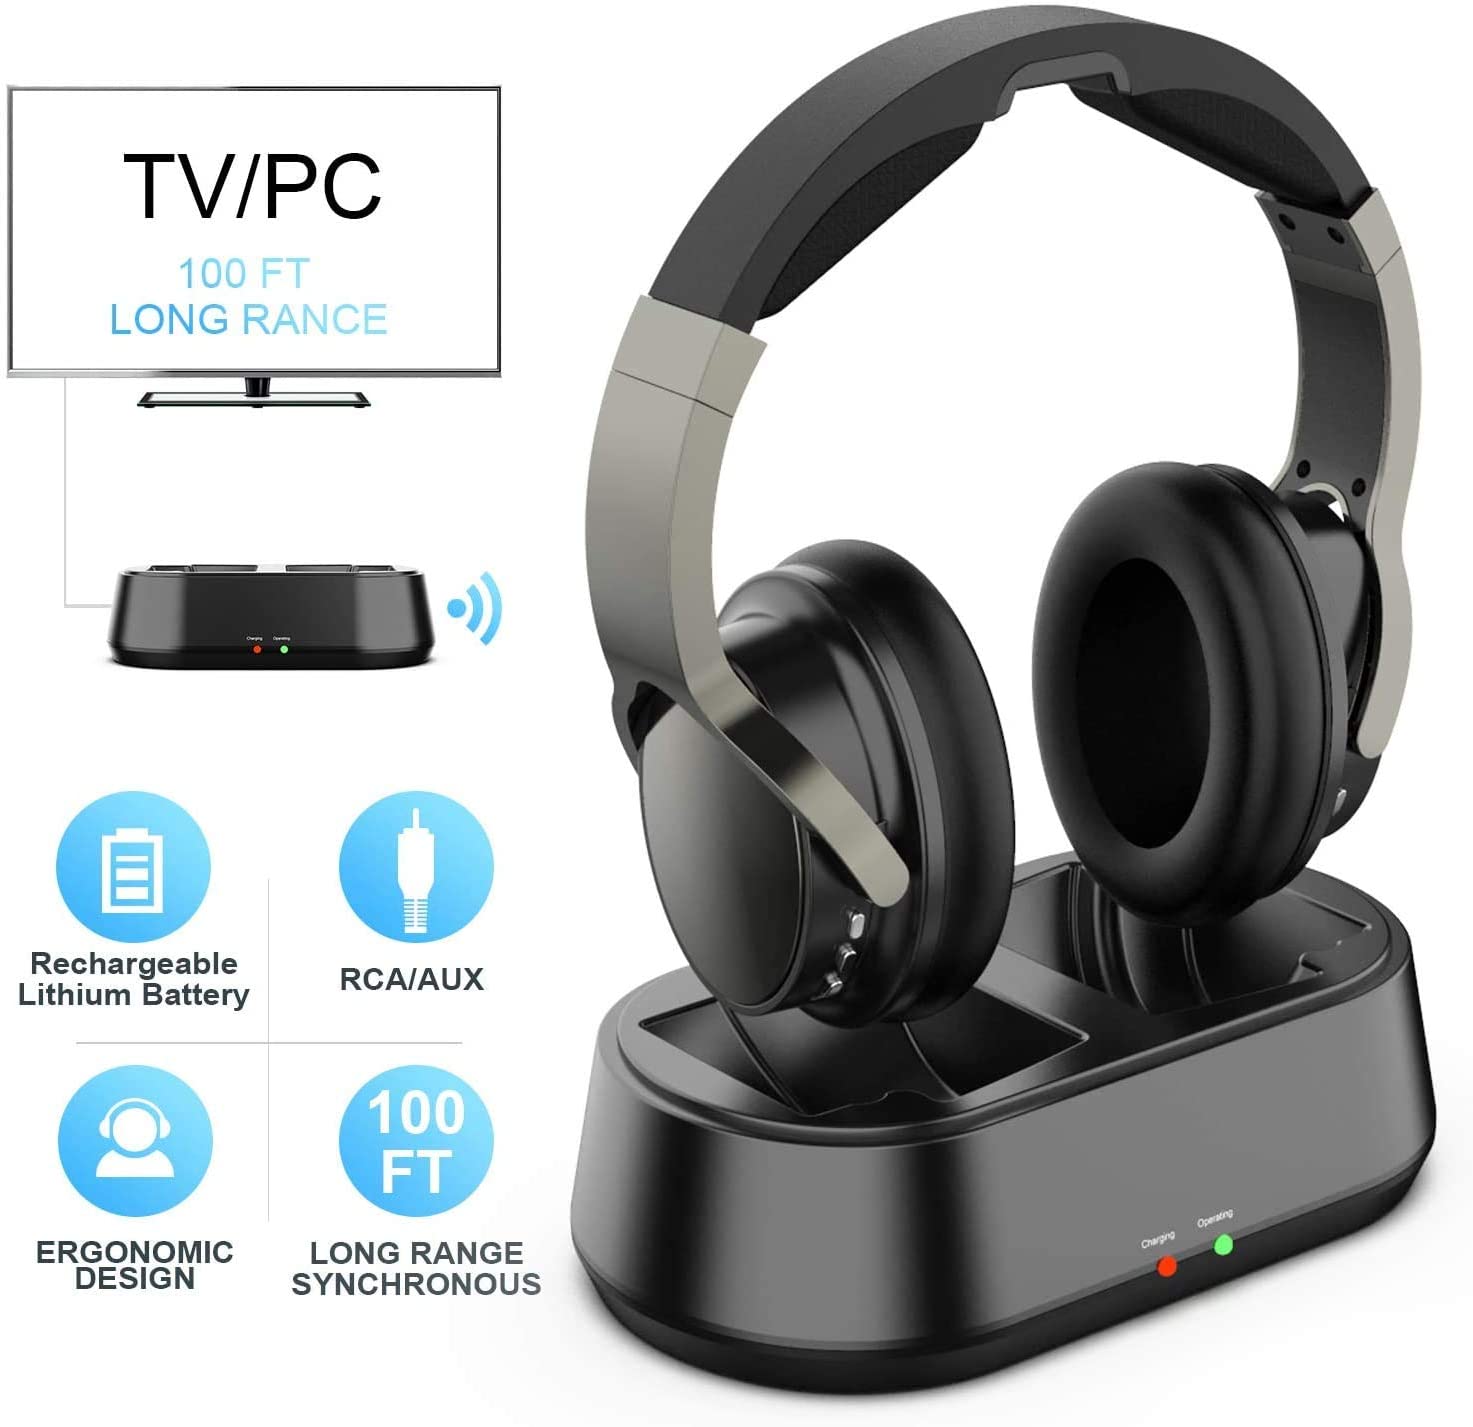 Wireless TV Headphones for TV Watching with Transmitter, 5 In 1